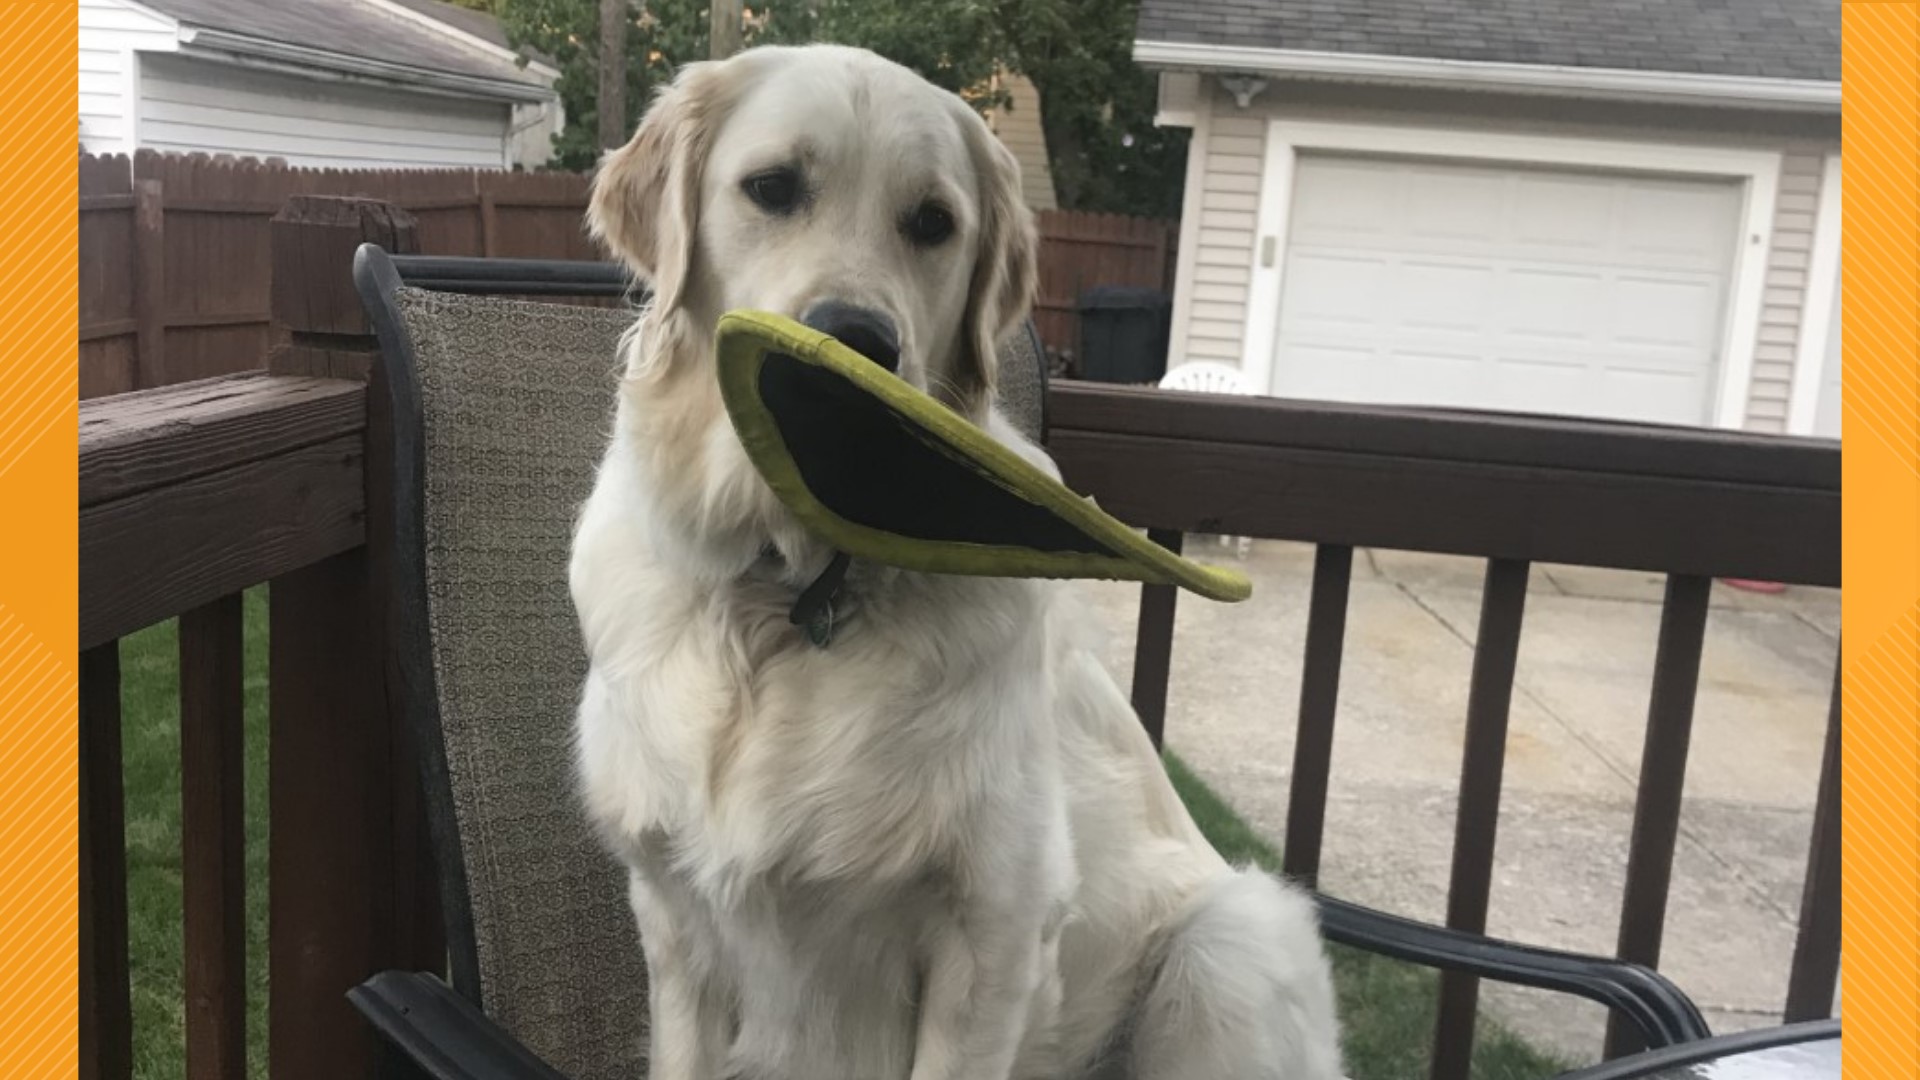 Wilson the golden retriever loves to help carry groceries into the house. We talk to his owners about his "trick" and his great personality.